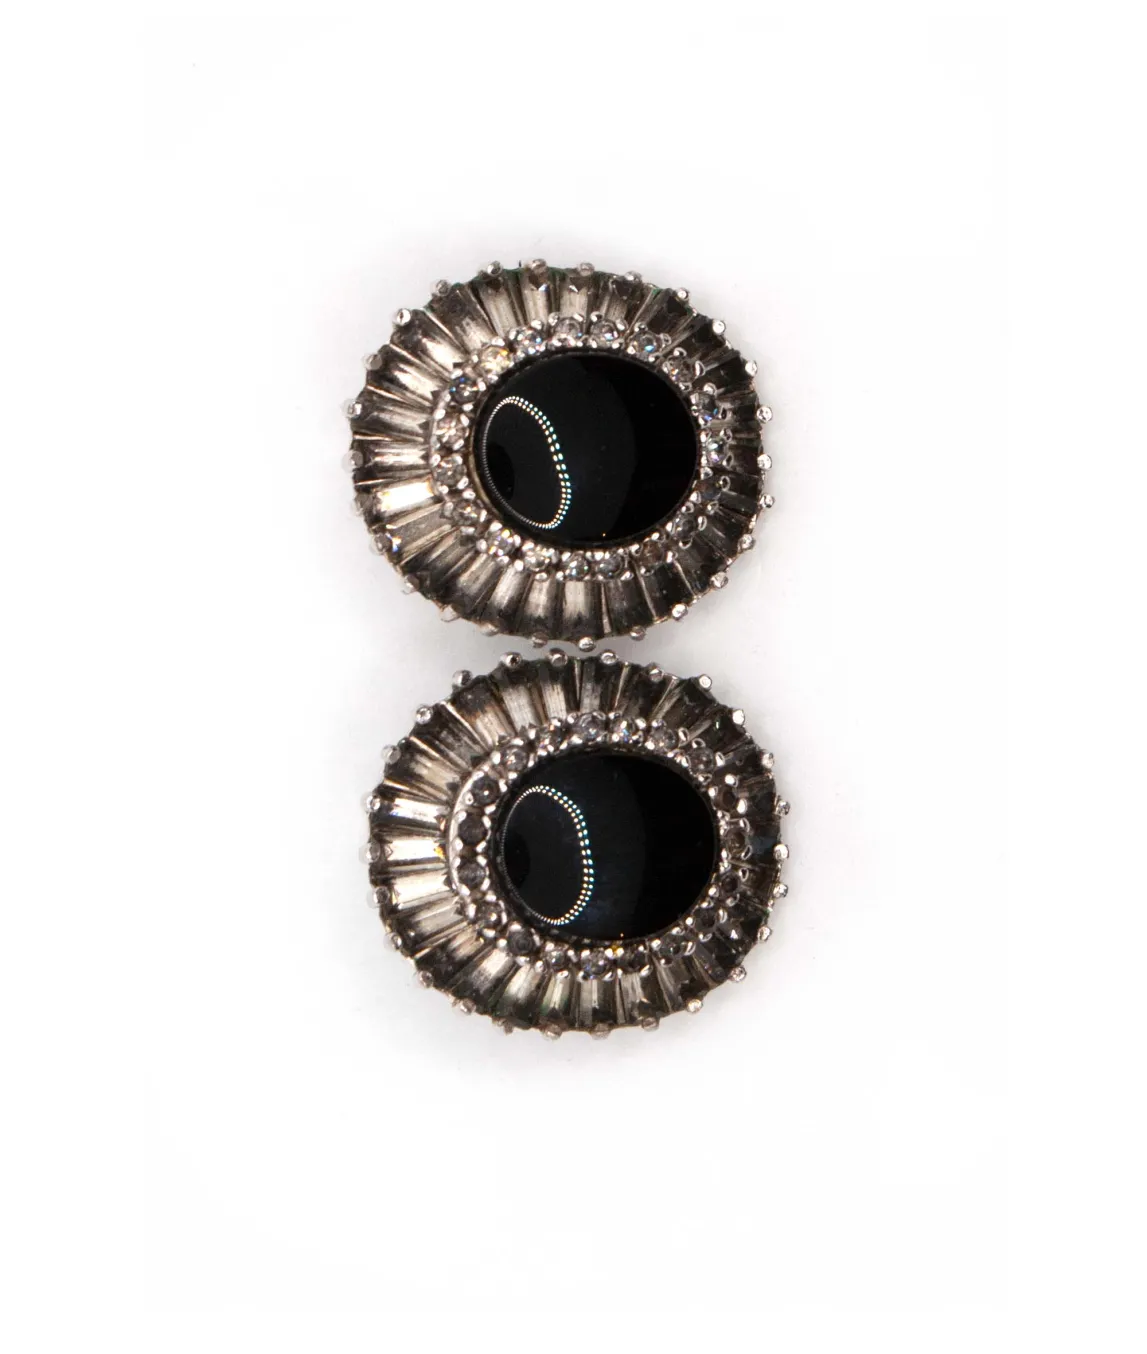 Vintage 1980s Panetta earrings with onyx and grey baguette crystals